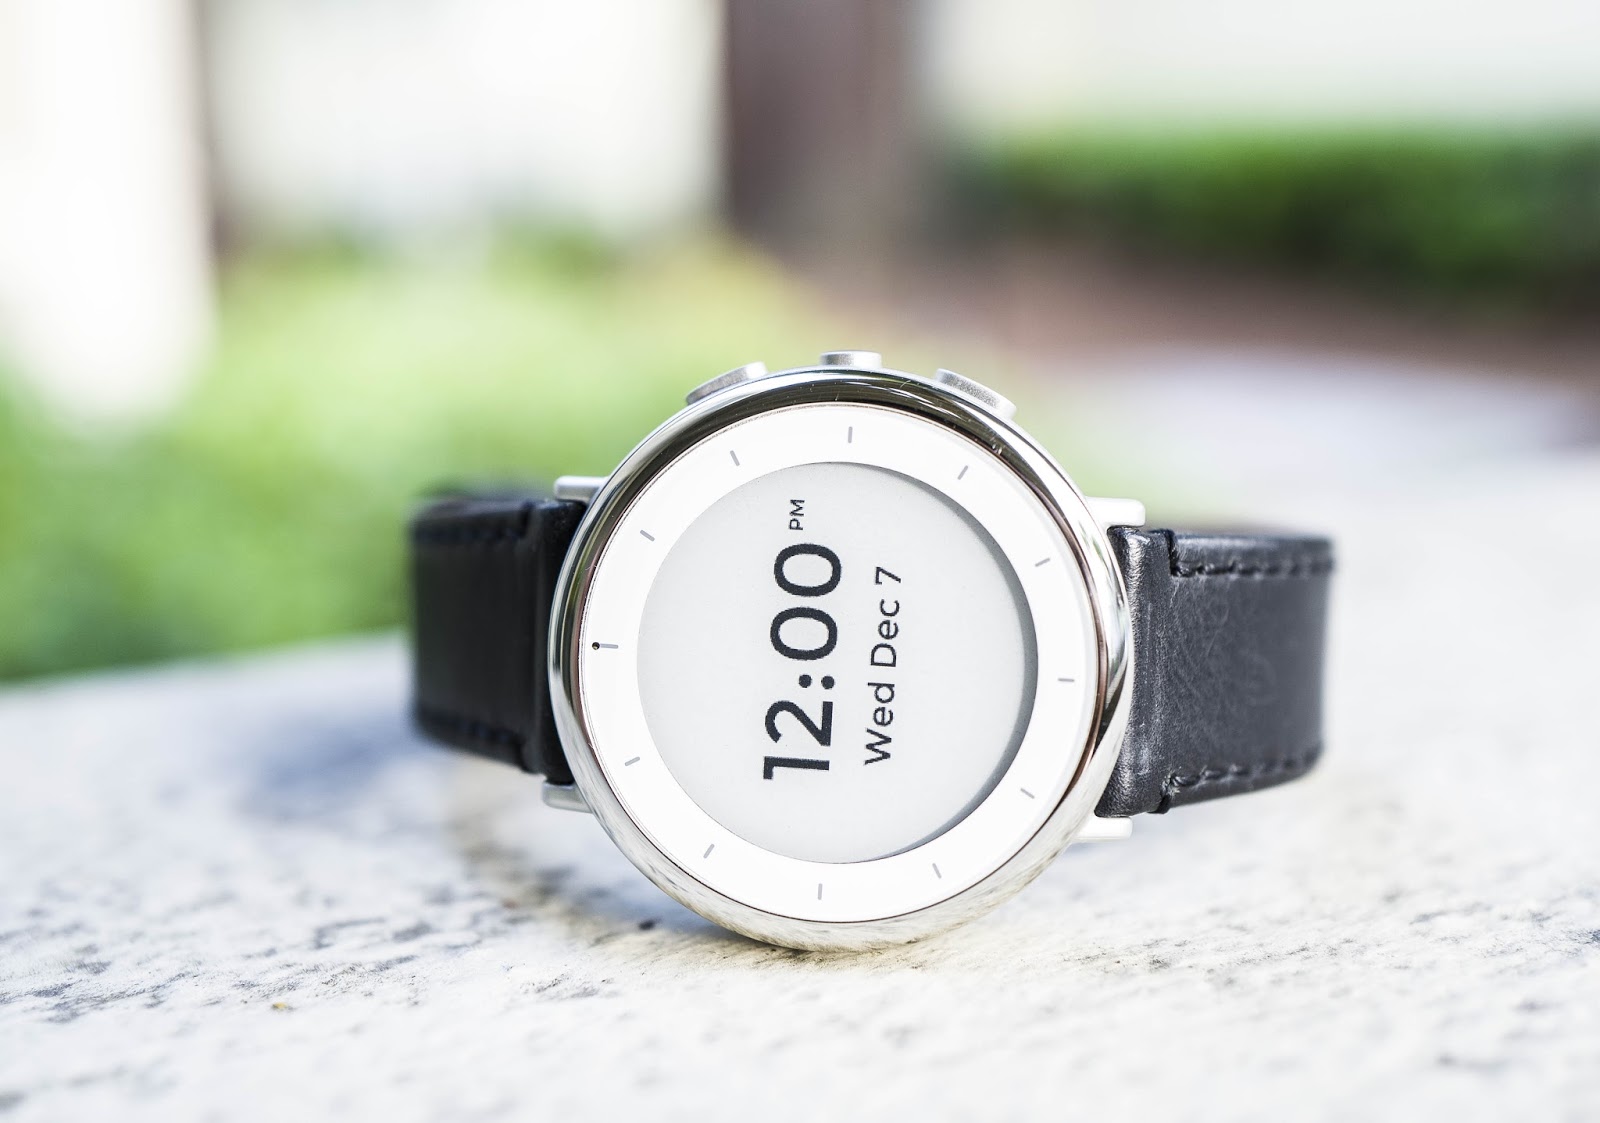 Verily’s health sensing research watch